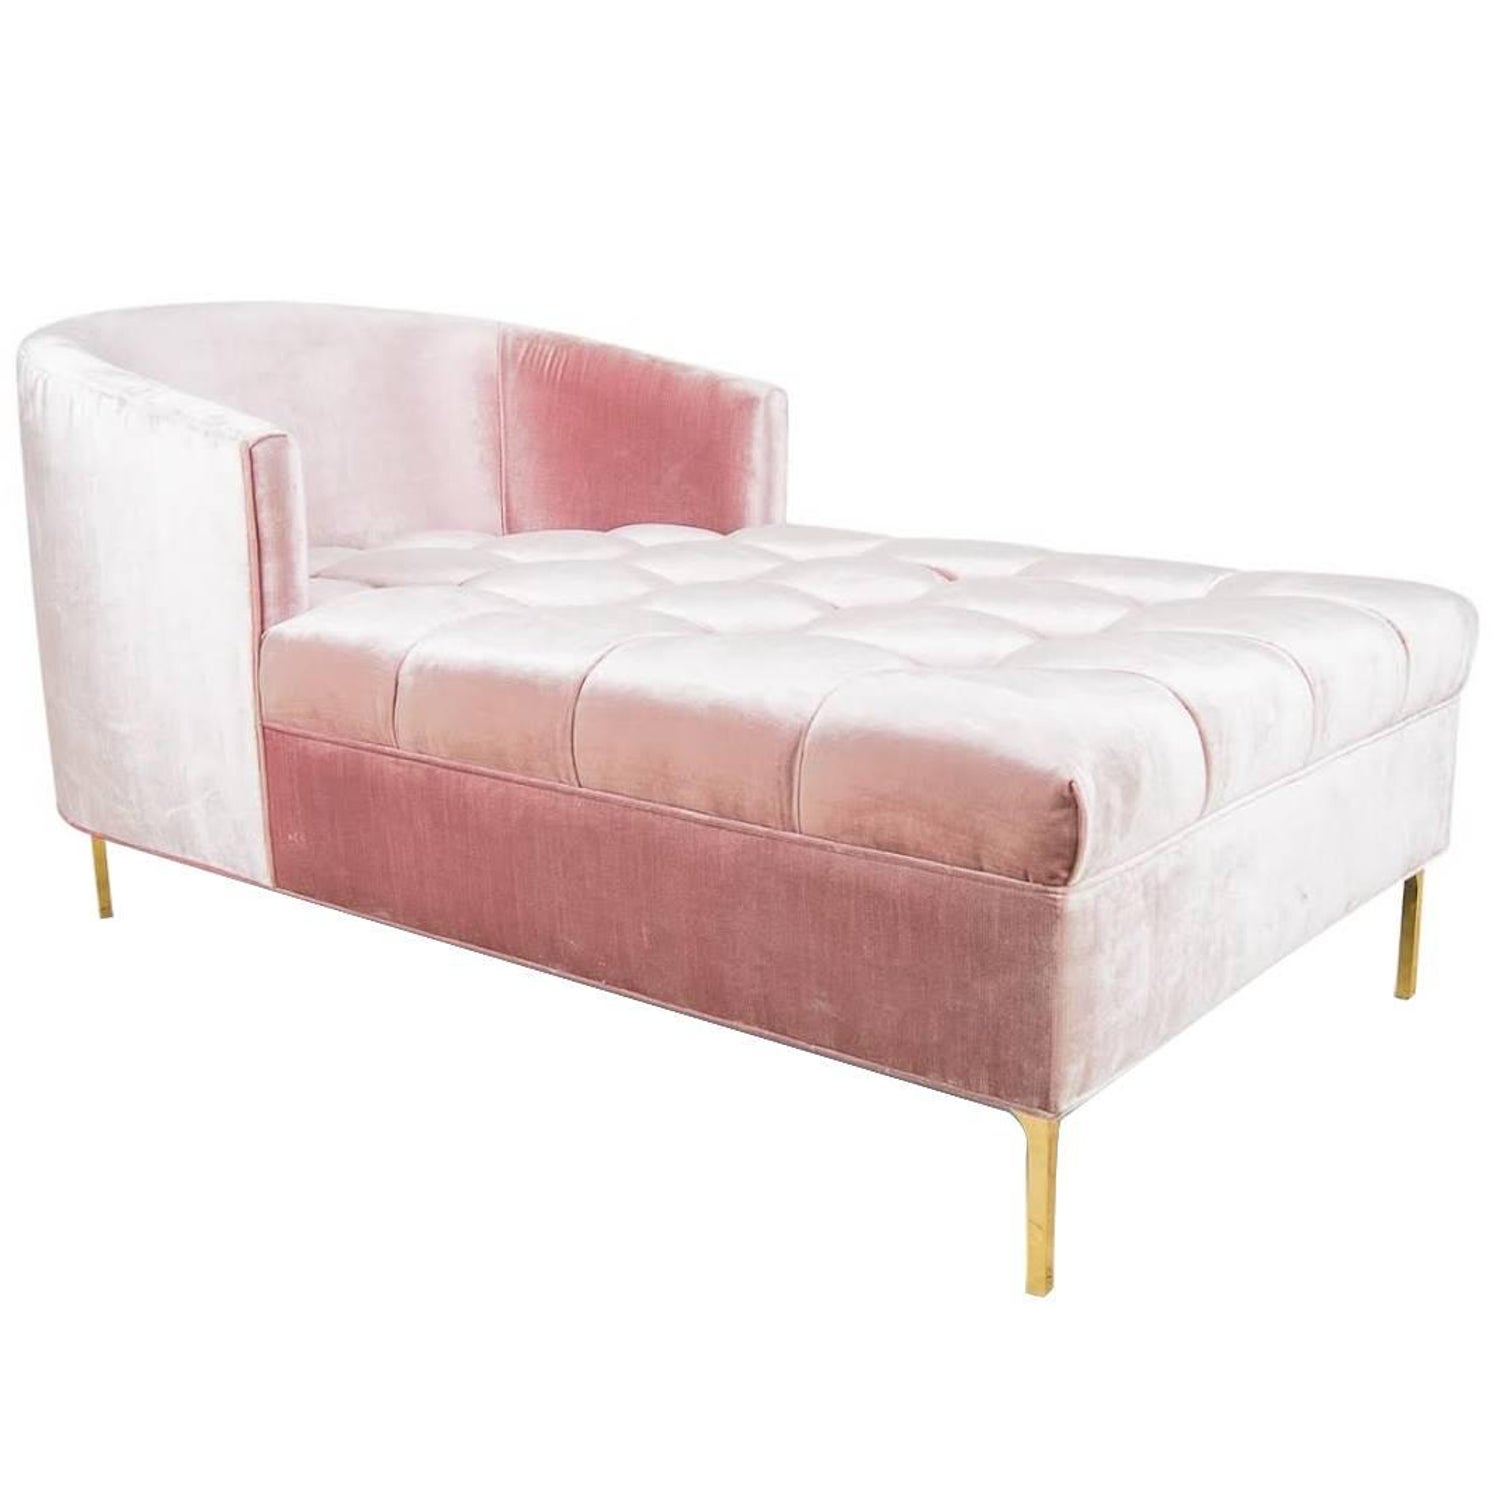 Mid-Century Style Tufted Lounge Chair with Brass Legs in Blush Pink Velvet  For Sale at 1stDibs